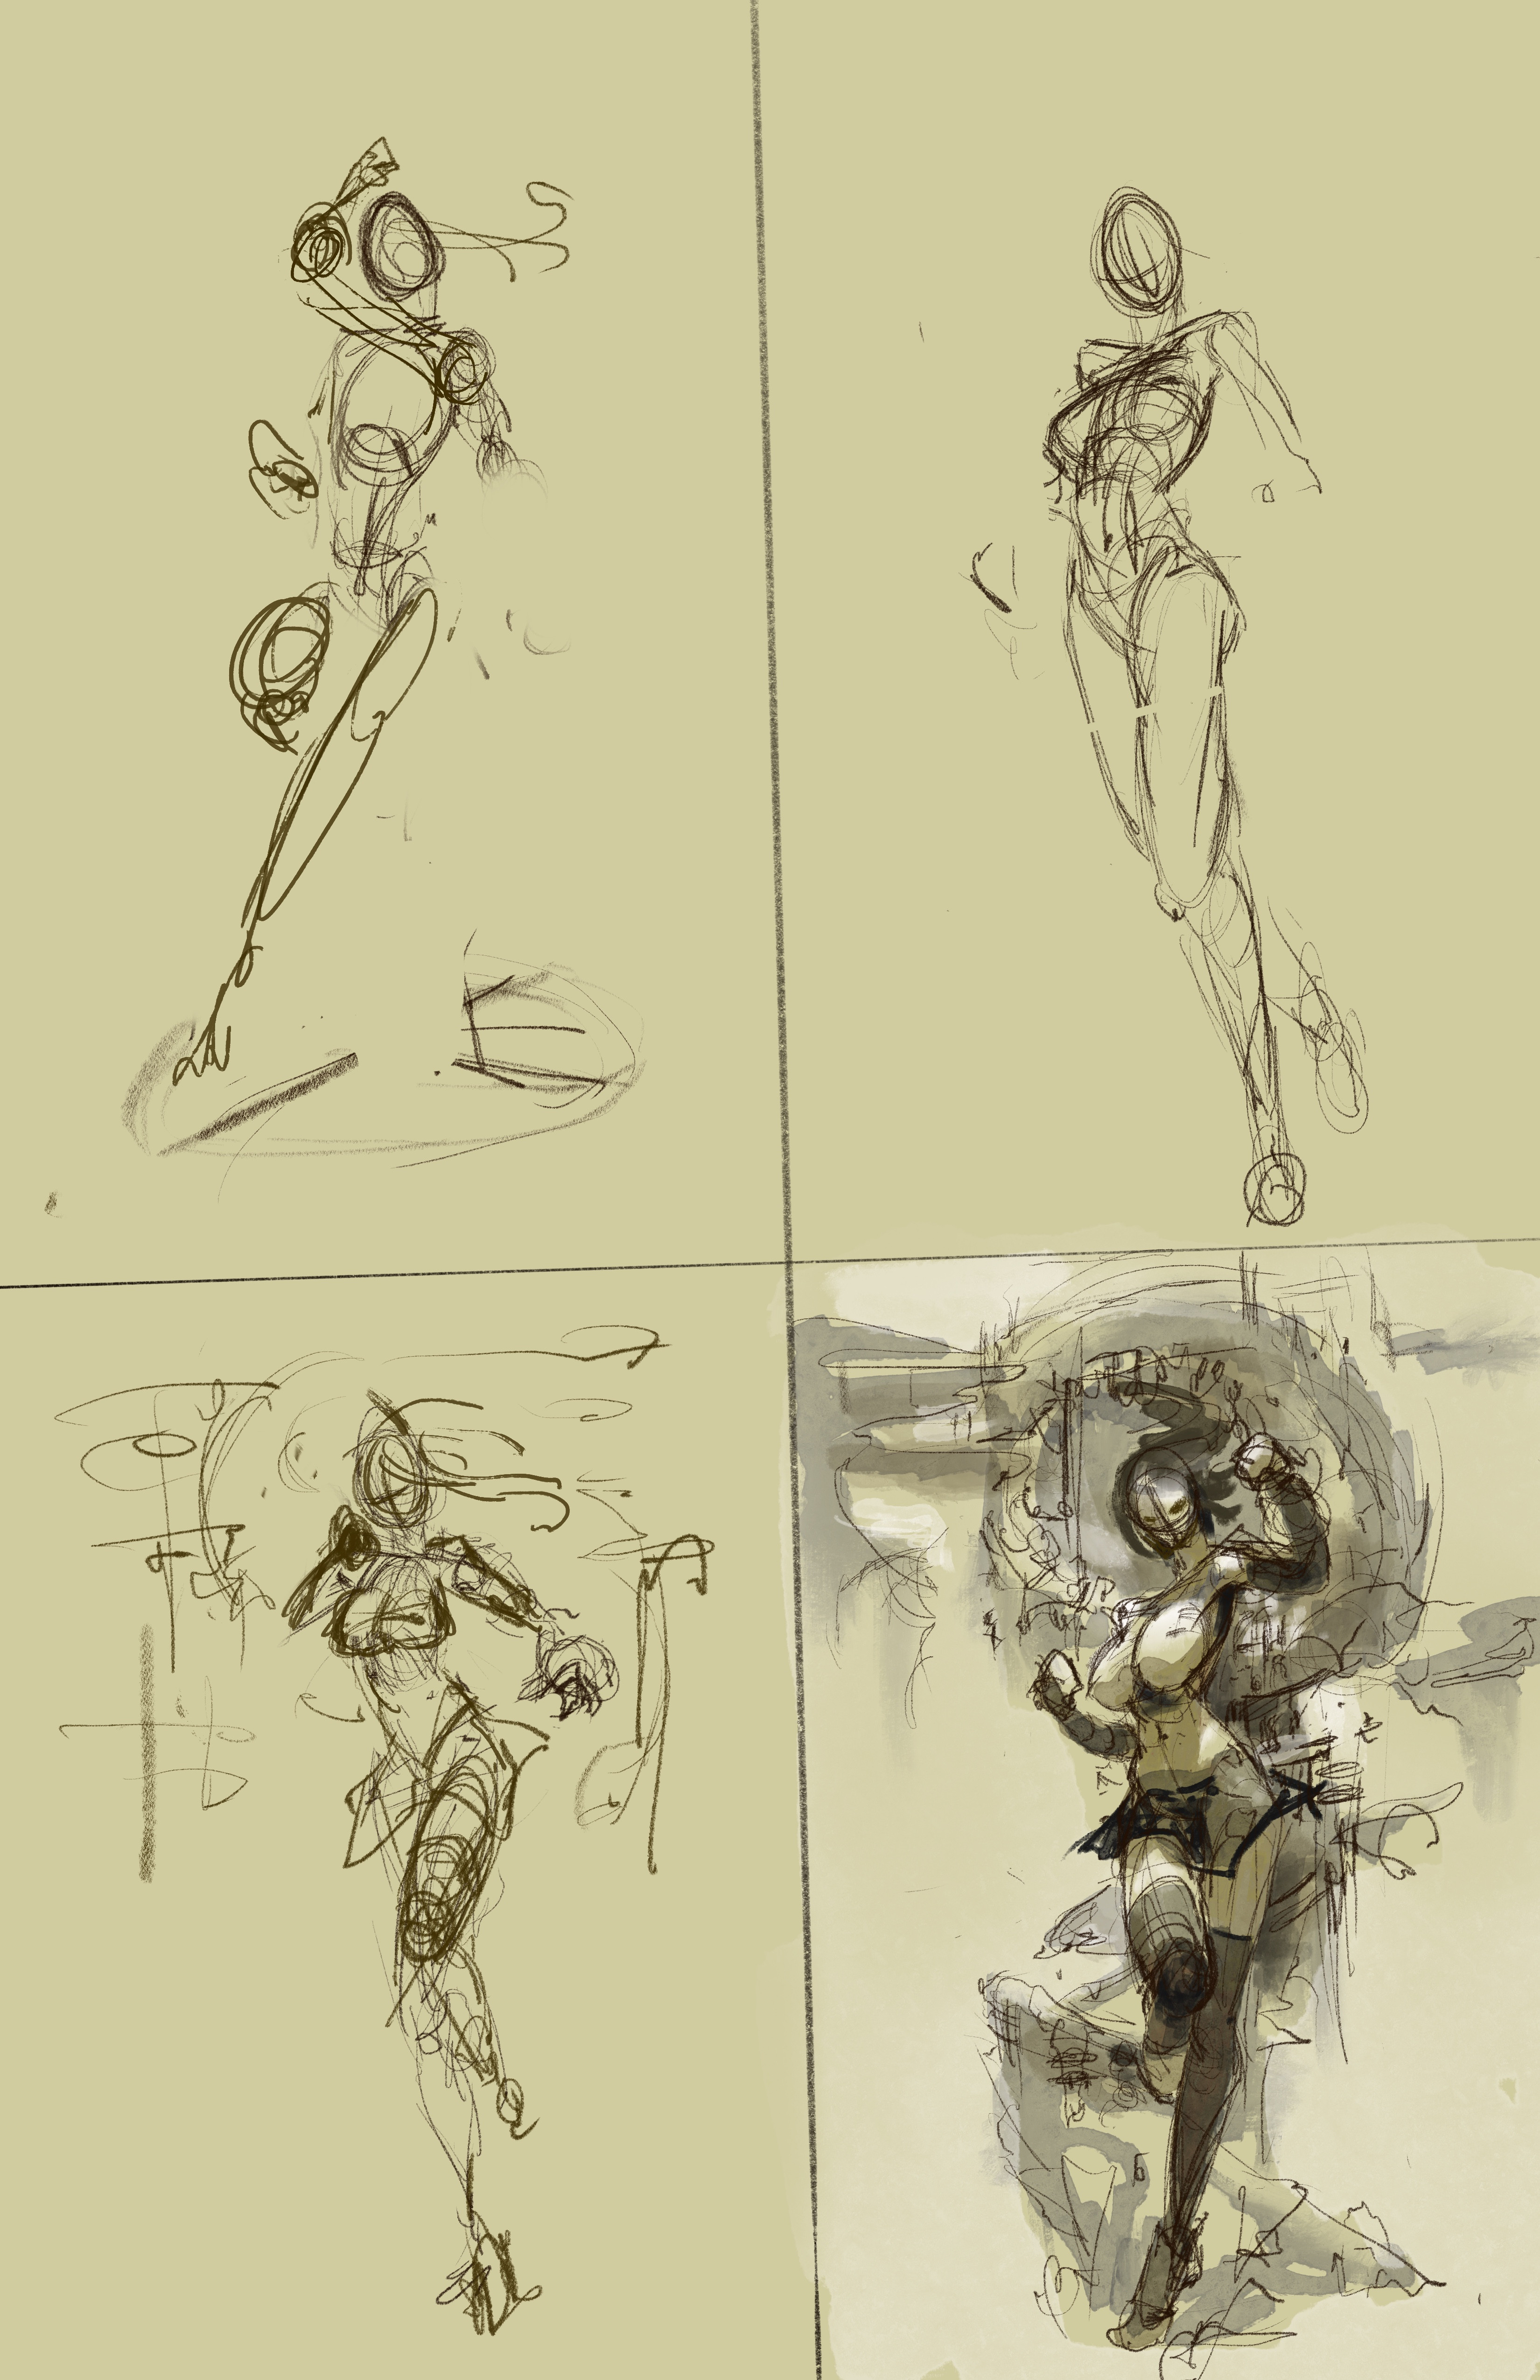 4 rough thumbnails out of 8